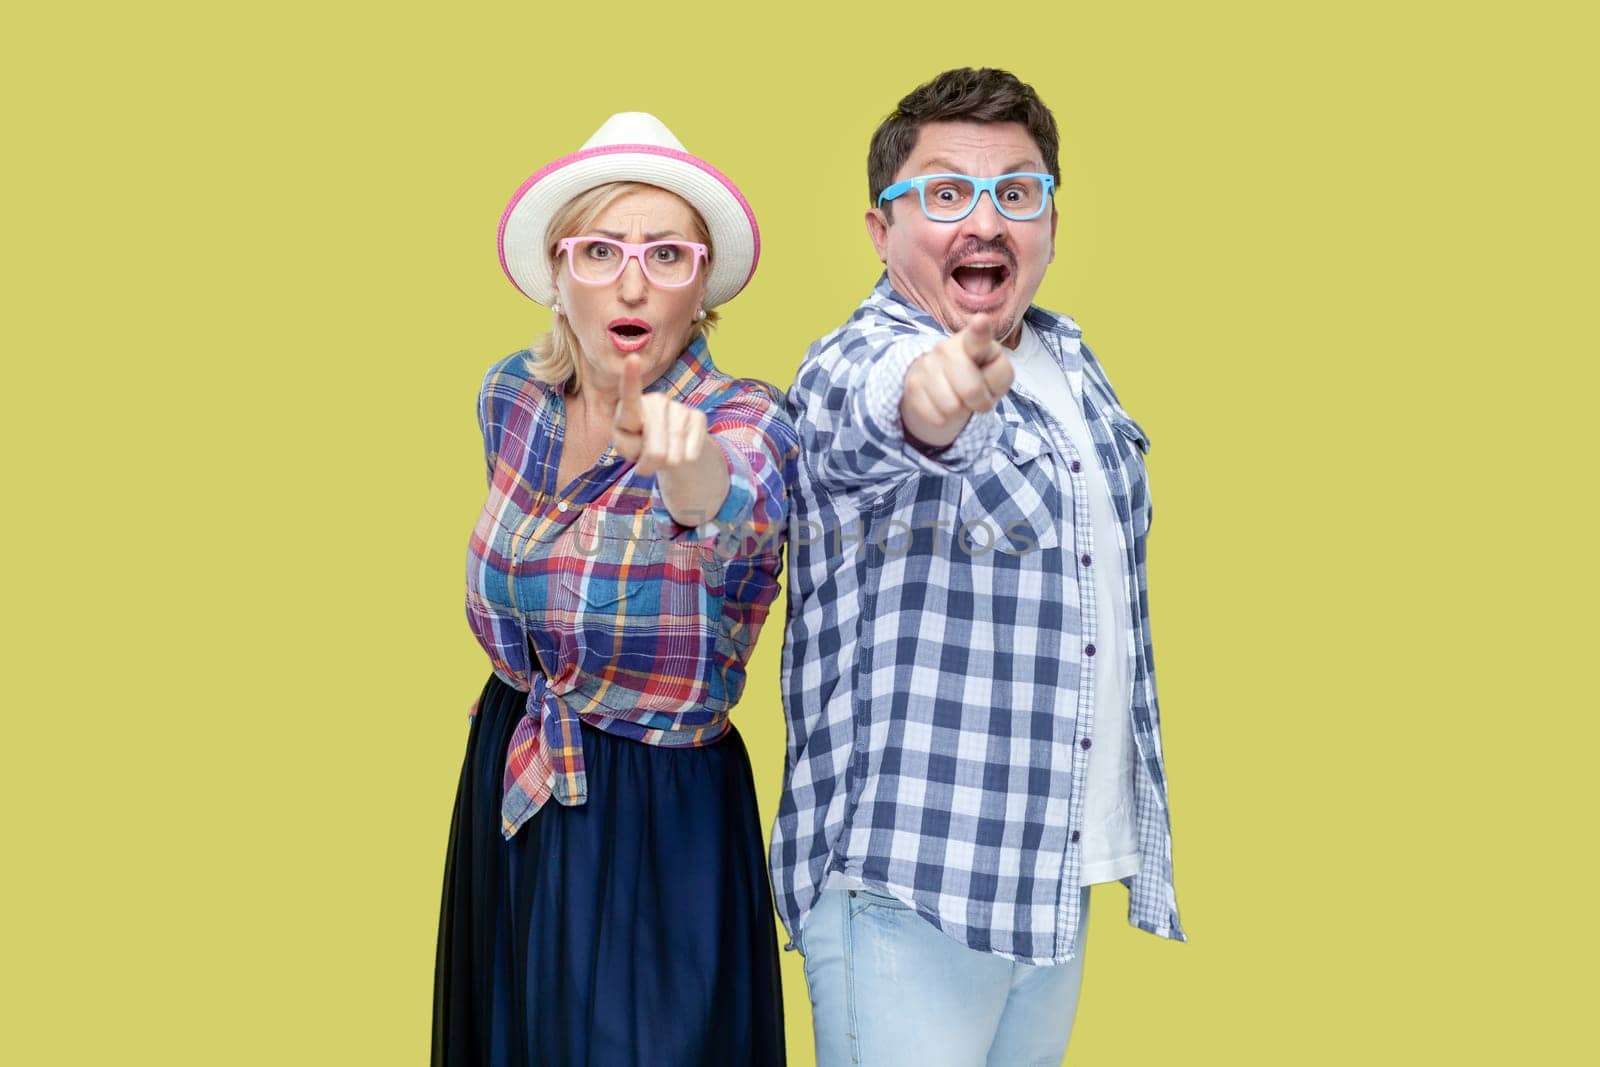 Shocked couple of friends, adult man and woman in casual checkered shirt standing together and pointing at camera, expressing astonishment. Indoor studio shot isolated, on yellow background.